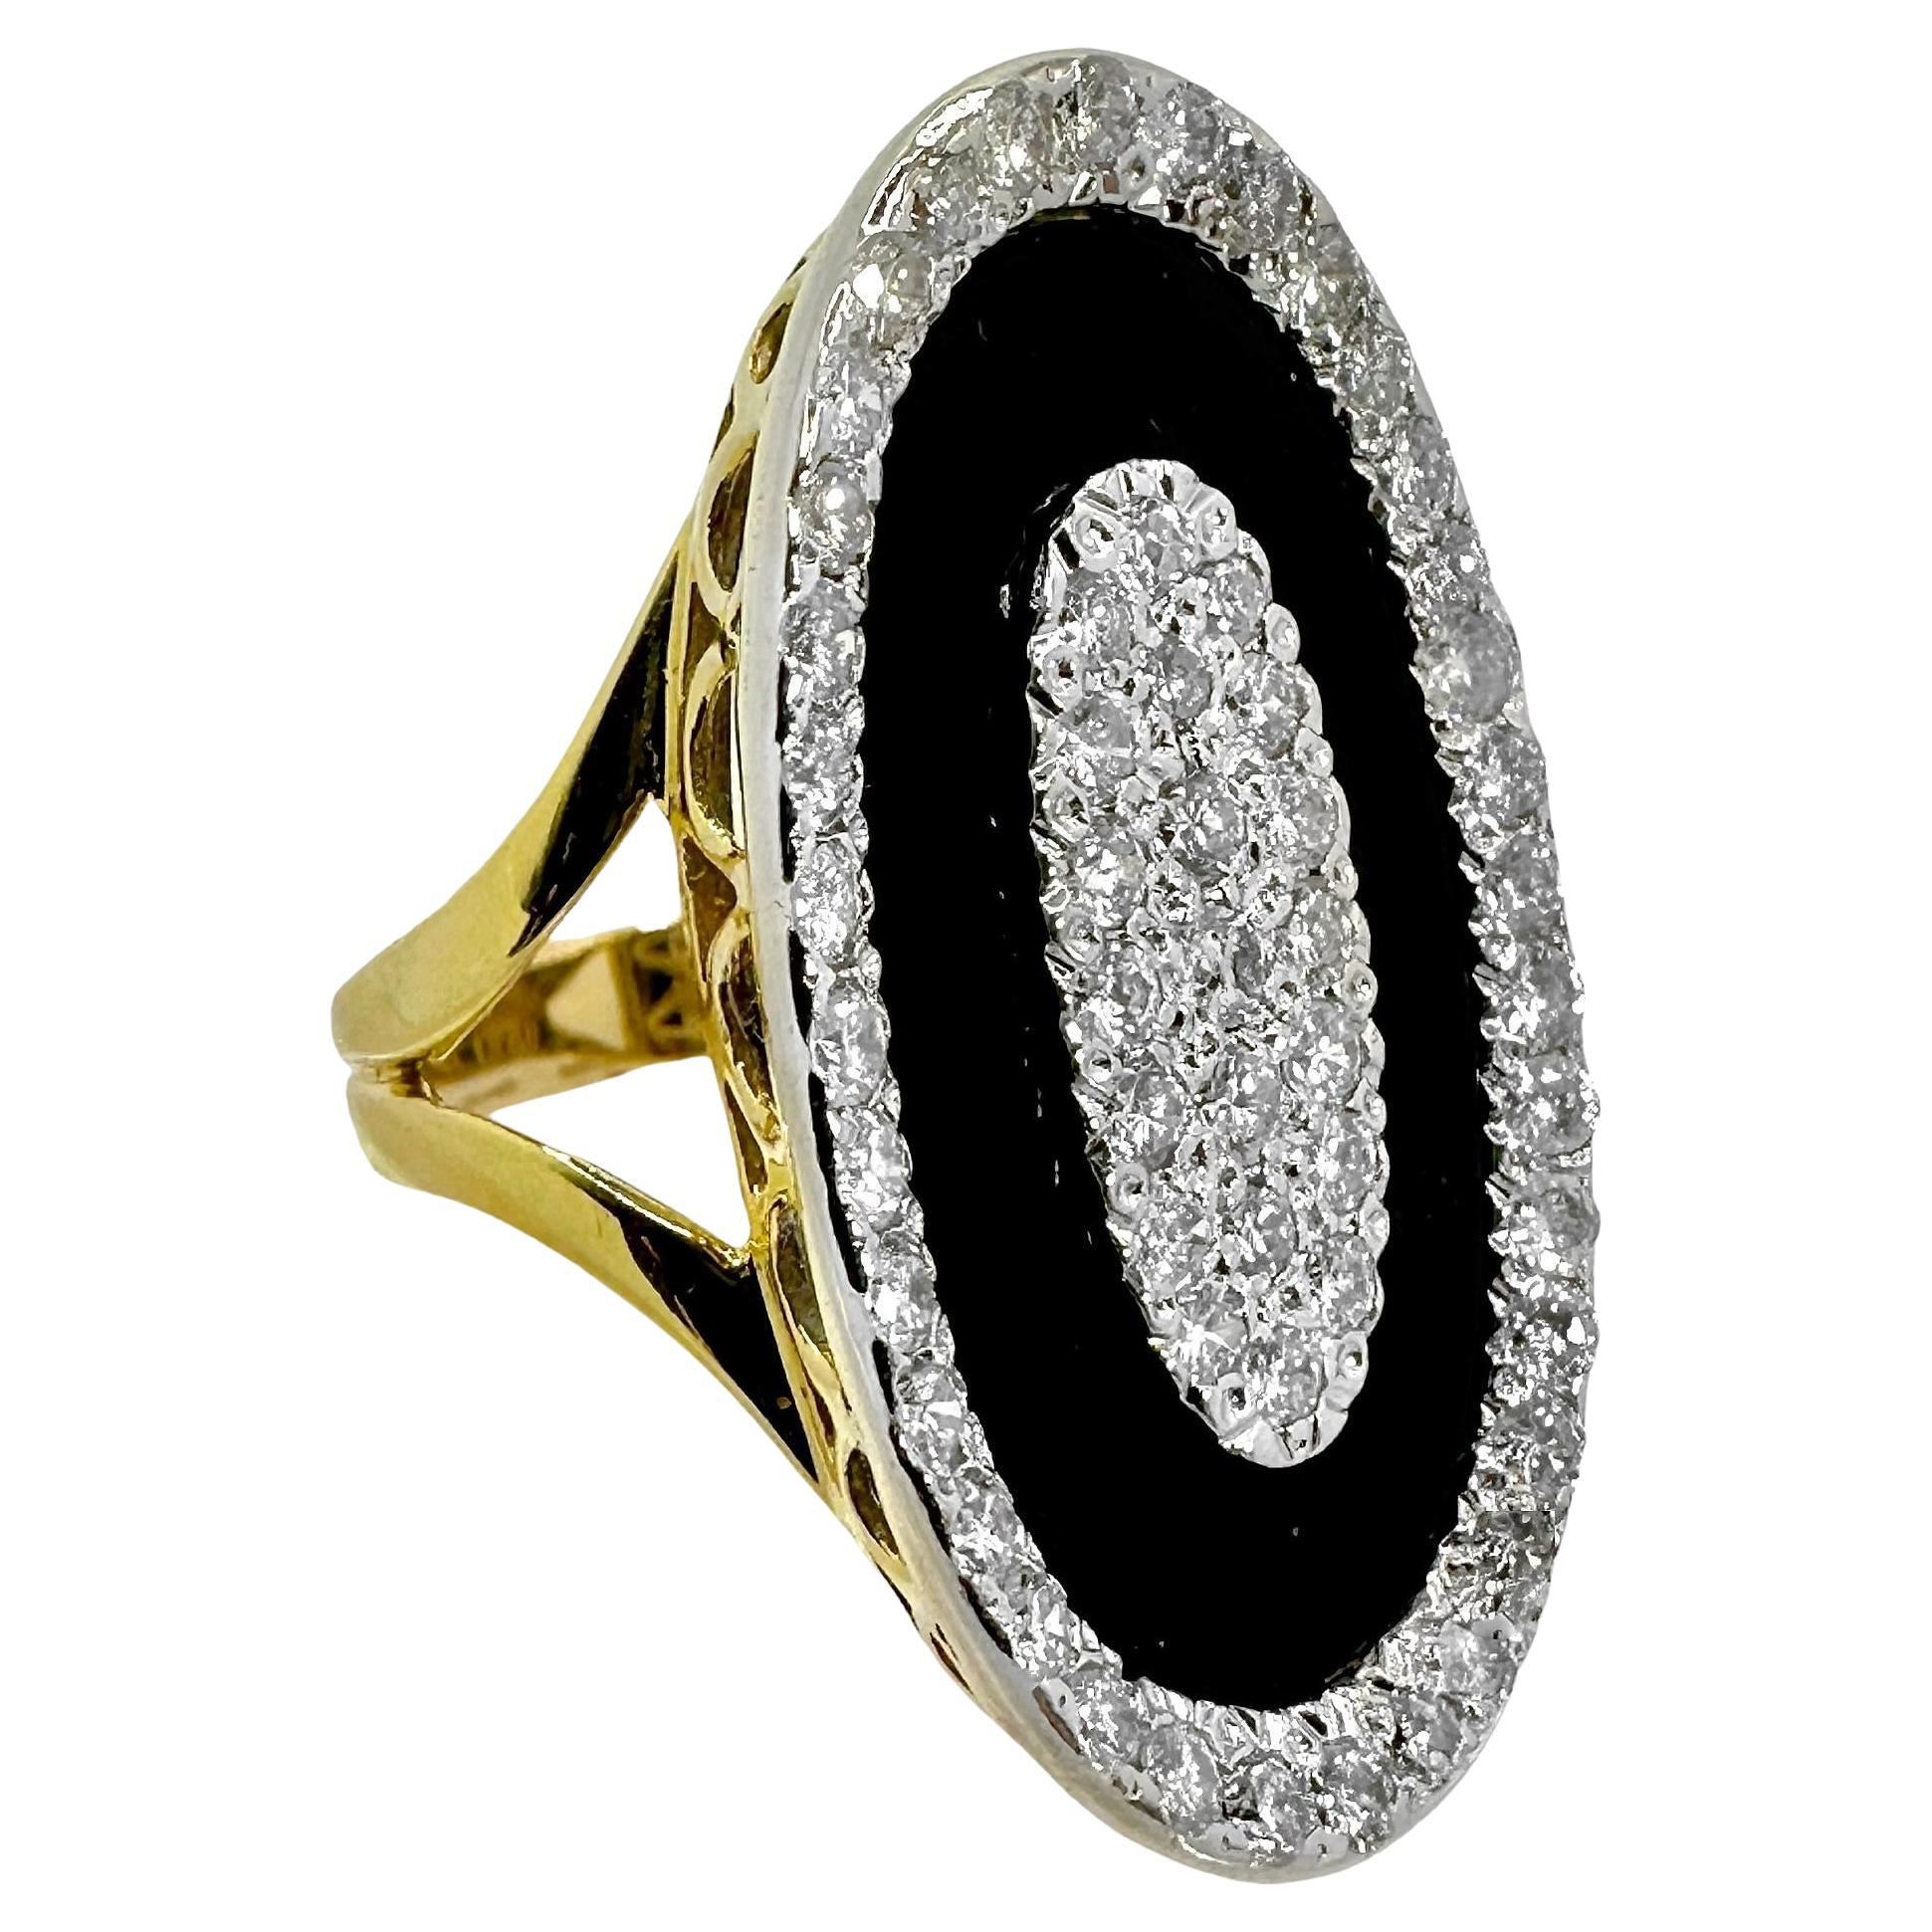 Onyx, Diamond and 18K Gold, Oval Shaped Ring, 1.25 Inches Long by .75 Inch Wide For Sale